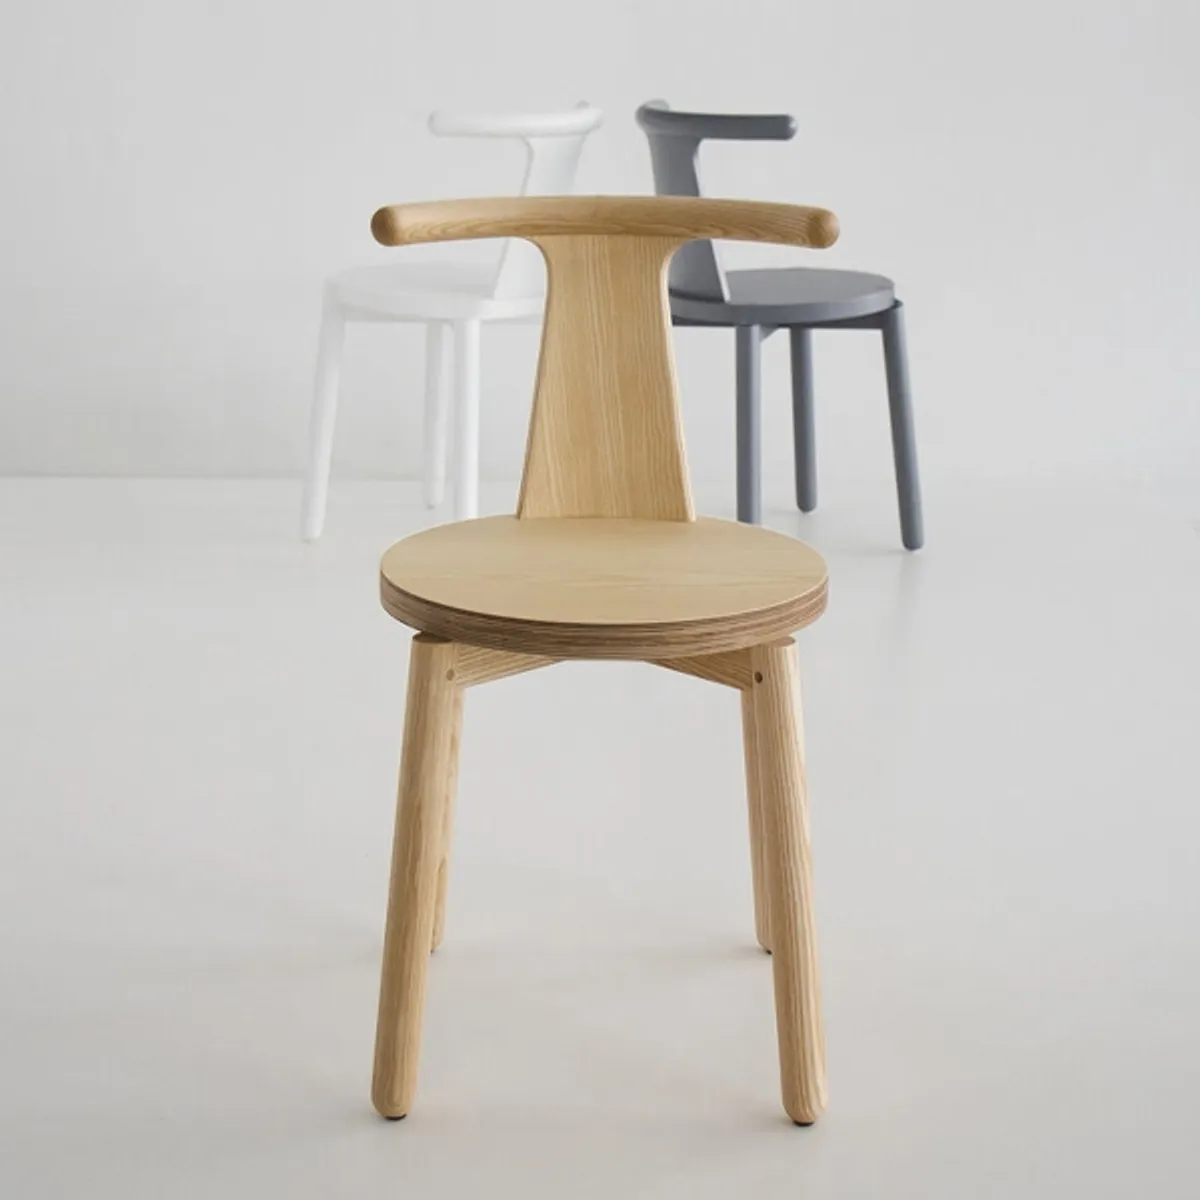 Verdure chair Insideout Contracts2